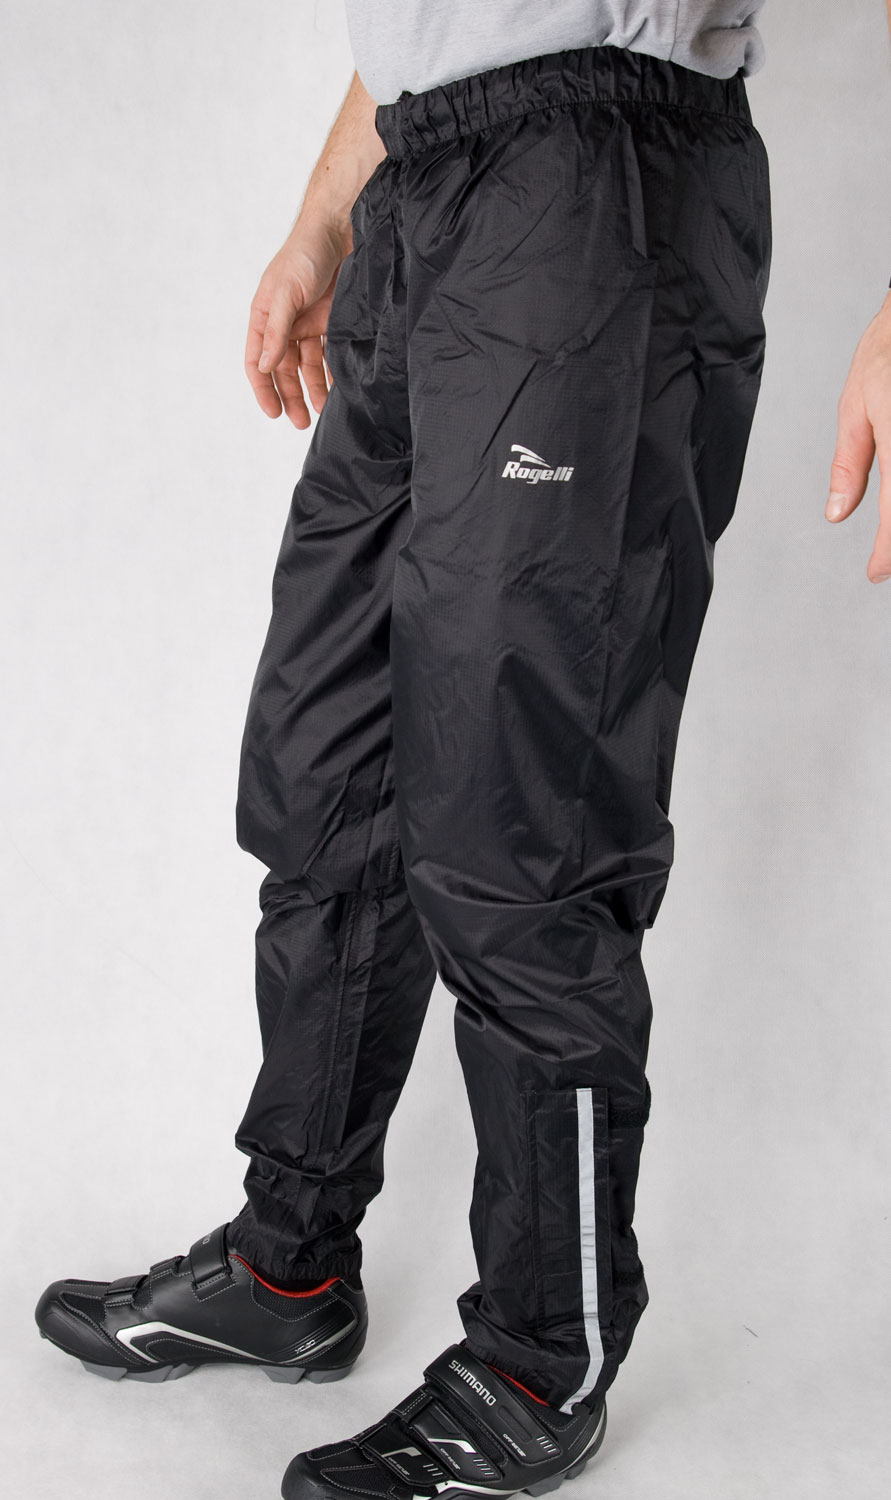 How to Choose the Best Waterproof Cycling Pants